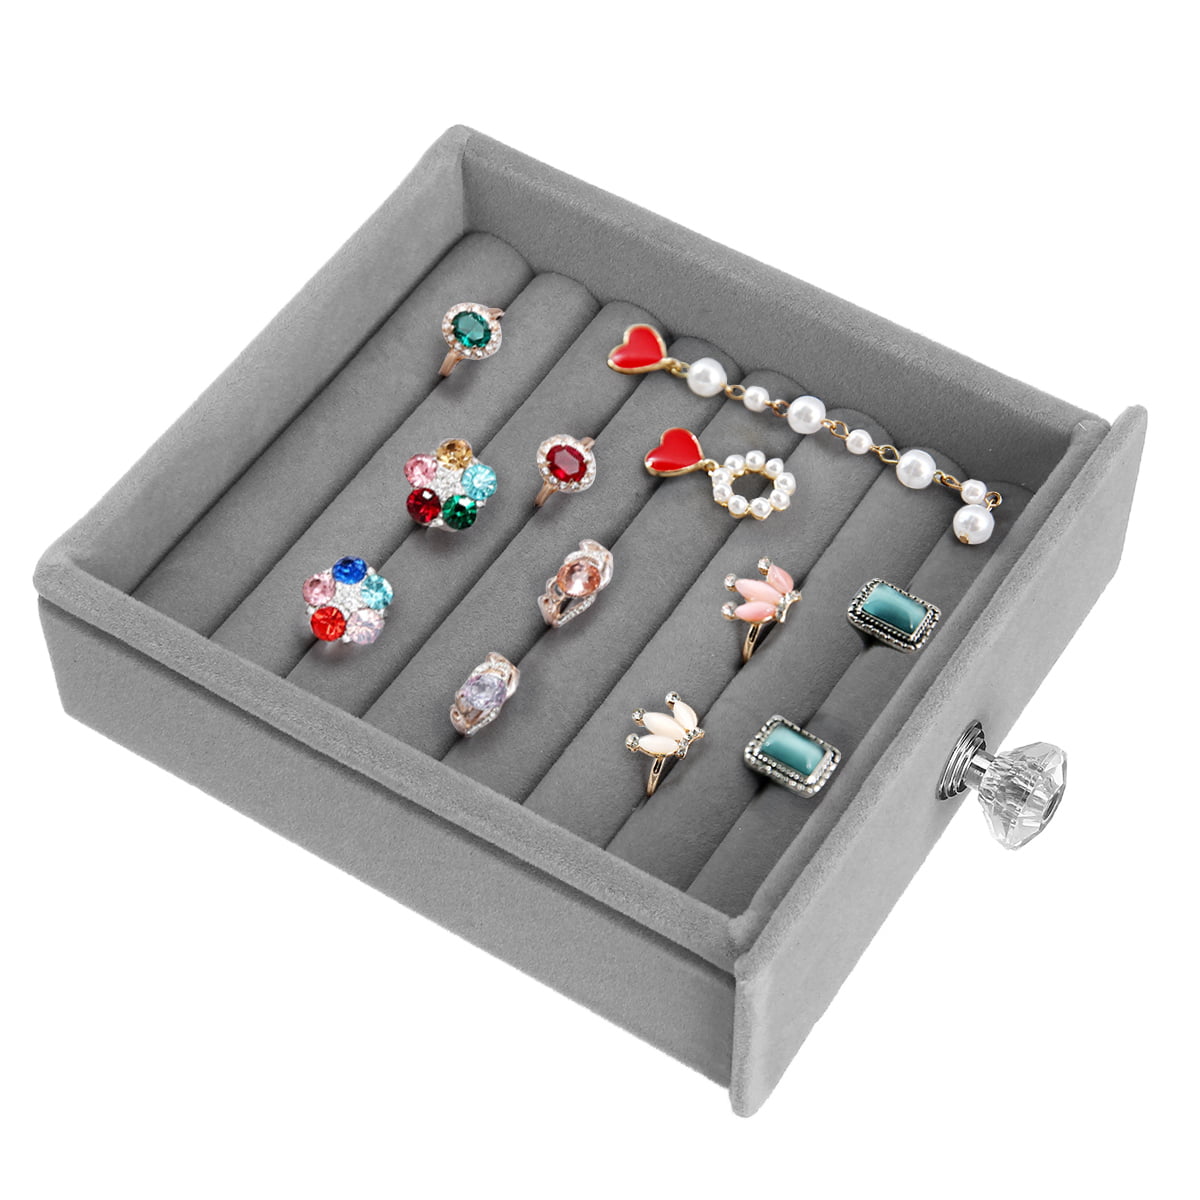  J JACKCUBE DESIGN Earring Organizer Tray, Earring Box with  Clear Lid 40 Slots Jewelry Box for Drawer, Stud Earring Necklace Bracelet  Ring Healing Stones Storage – MK333A : Clothing, Shoes & Jewelry